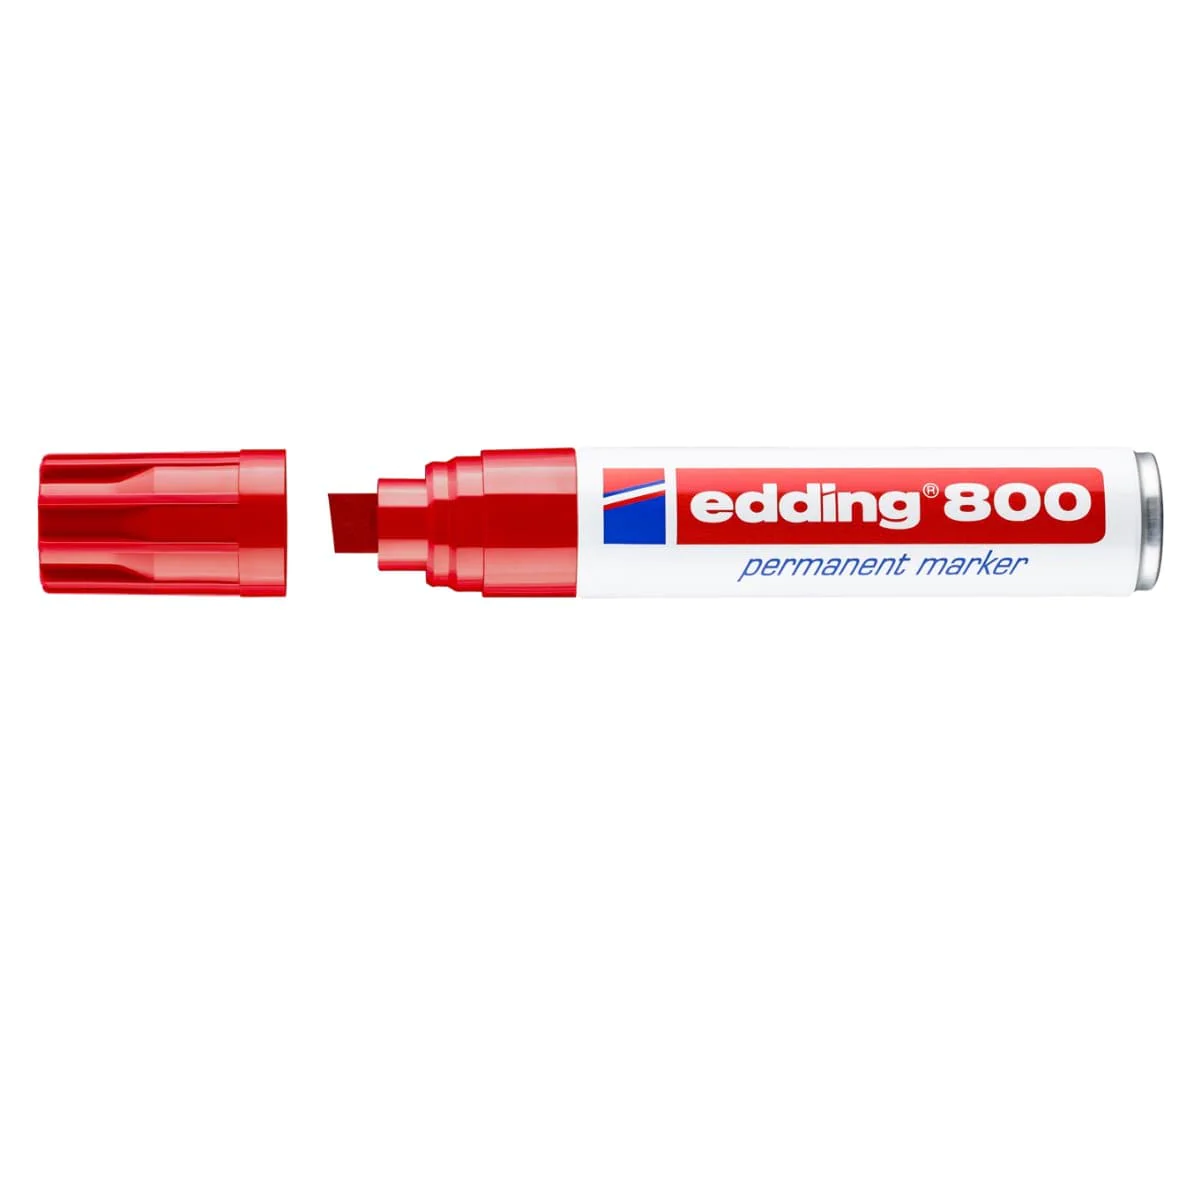 office stationery suppliers in abu dhabi pen pencil online shopping nearest stationery store near me office supply store dubai